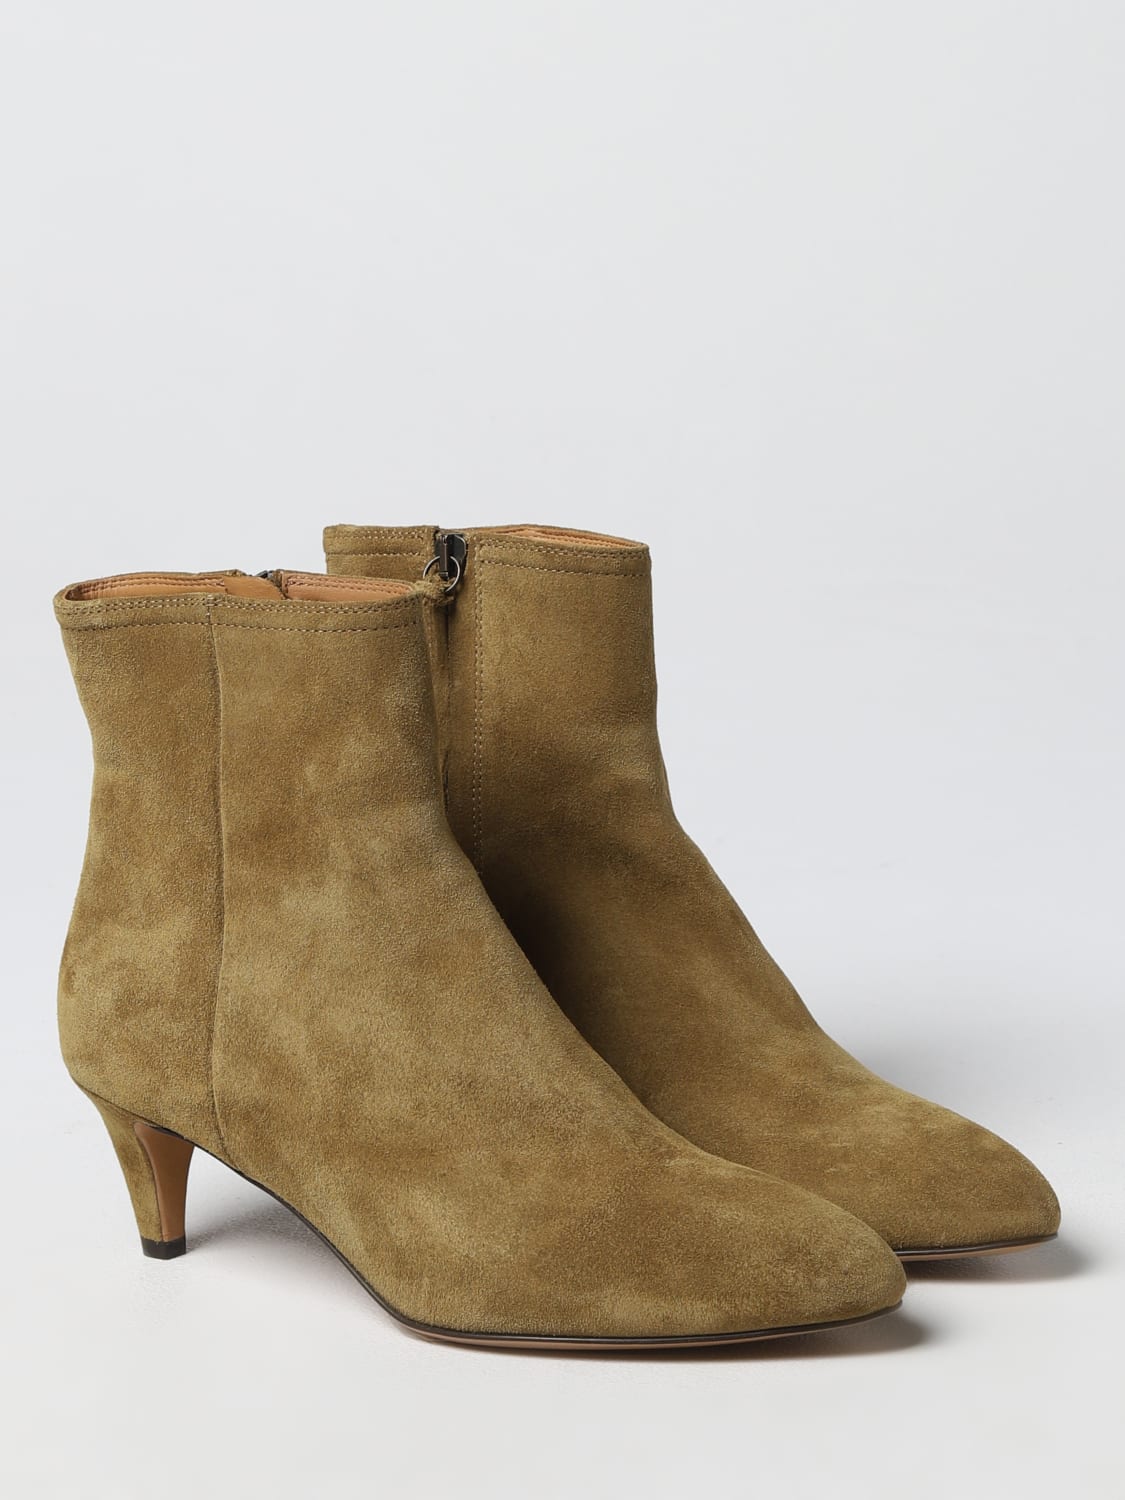 ISABEL MARANT: Deone suede ankle boot - Dove Grey | Isabel Marant flat ...